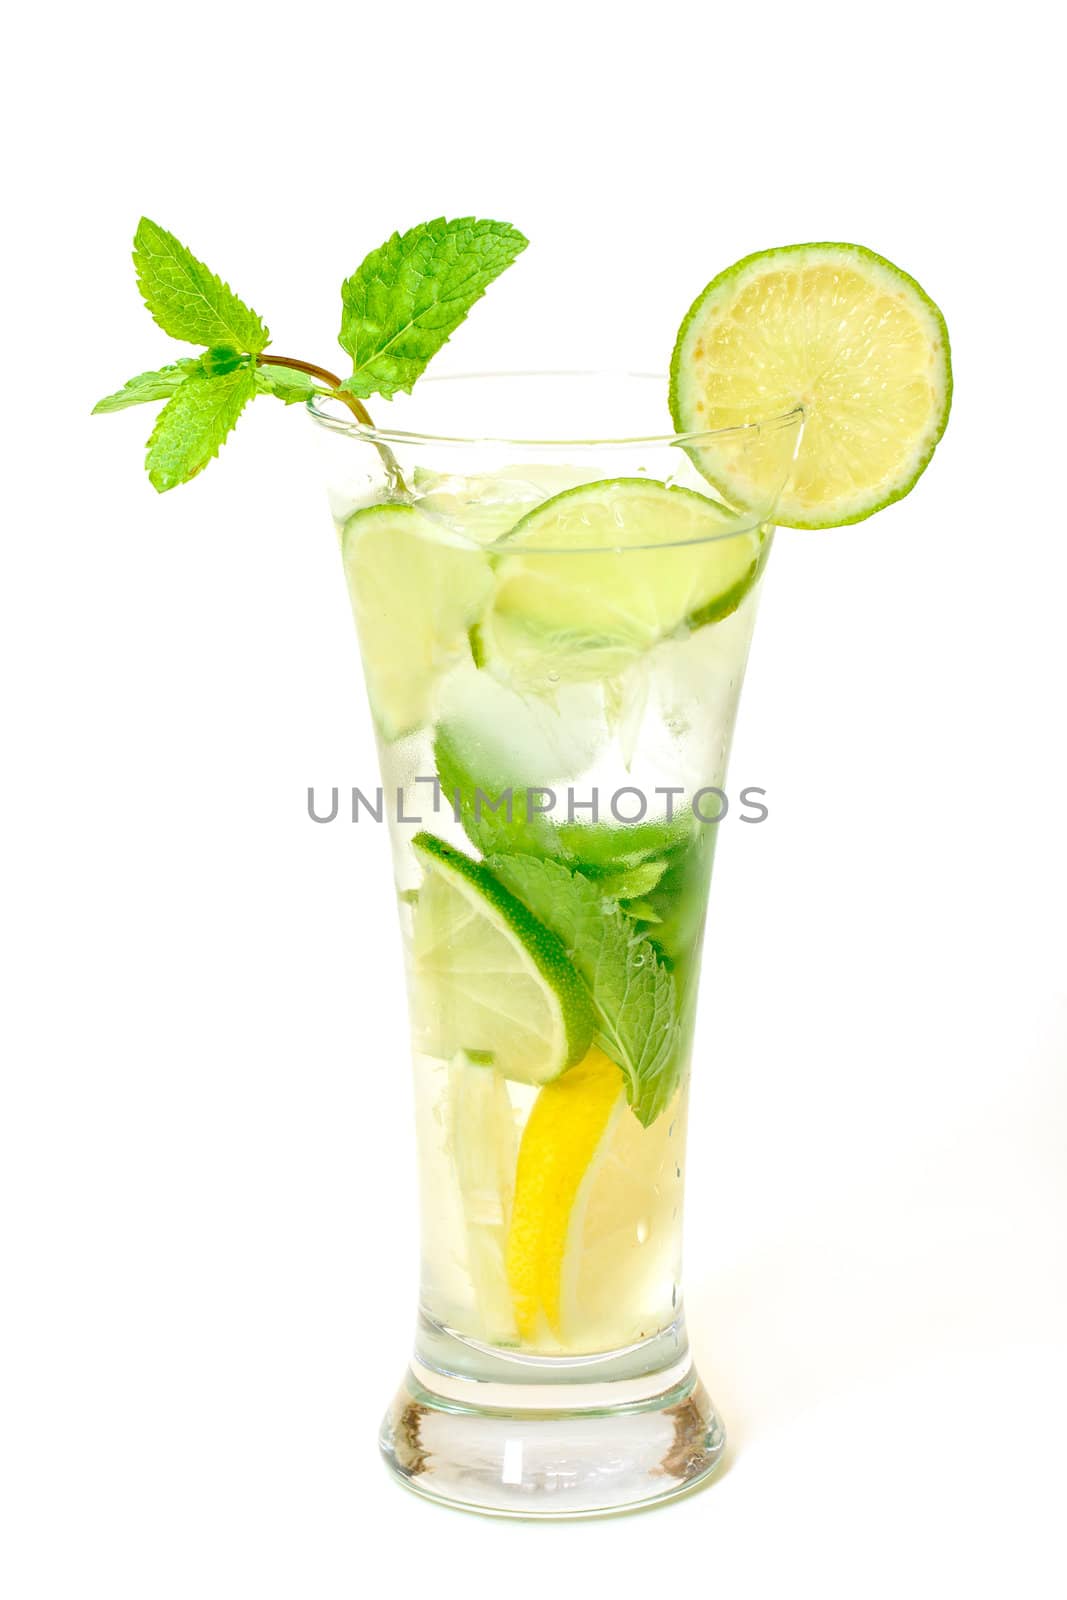 Mojito Cocktail in a Glass Beaker, on white background